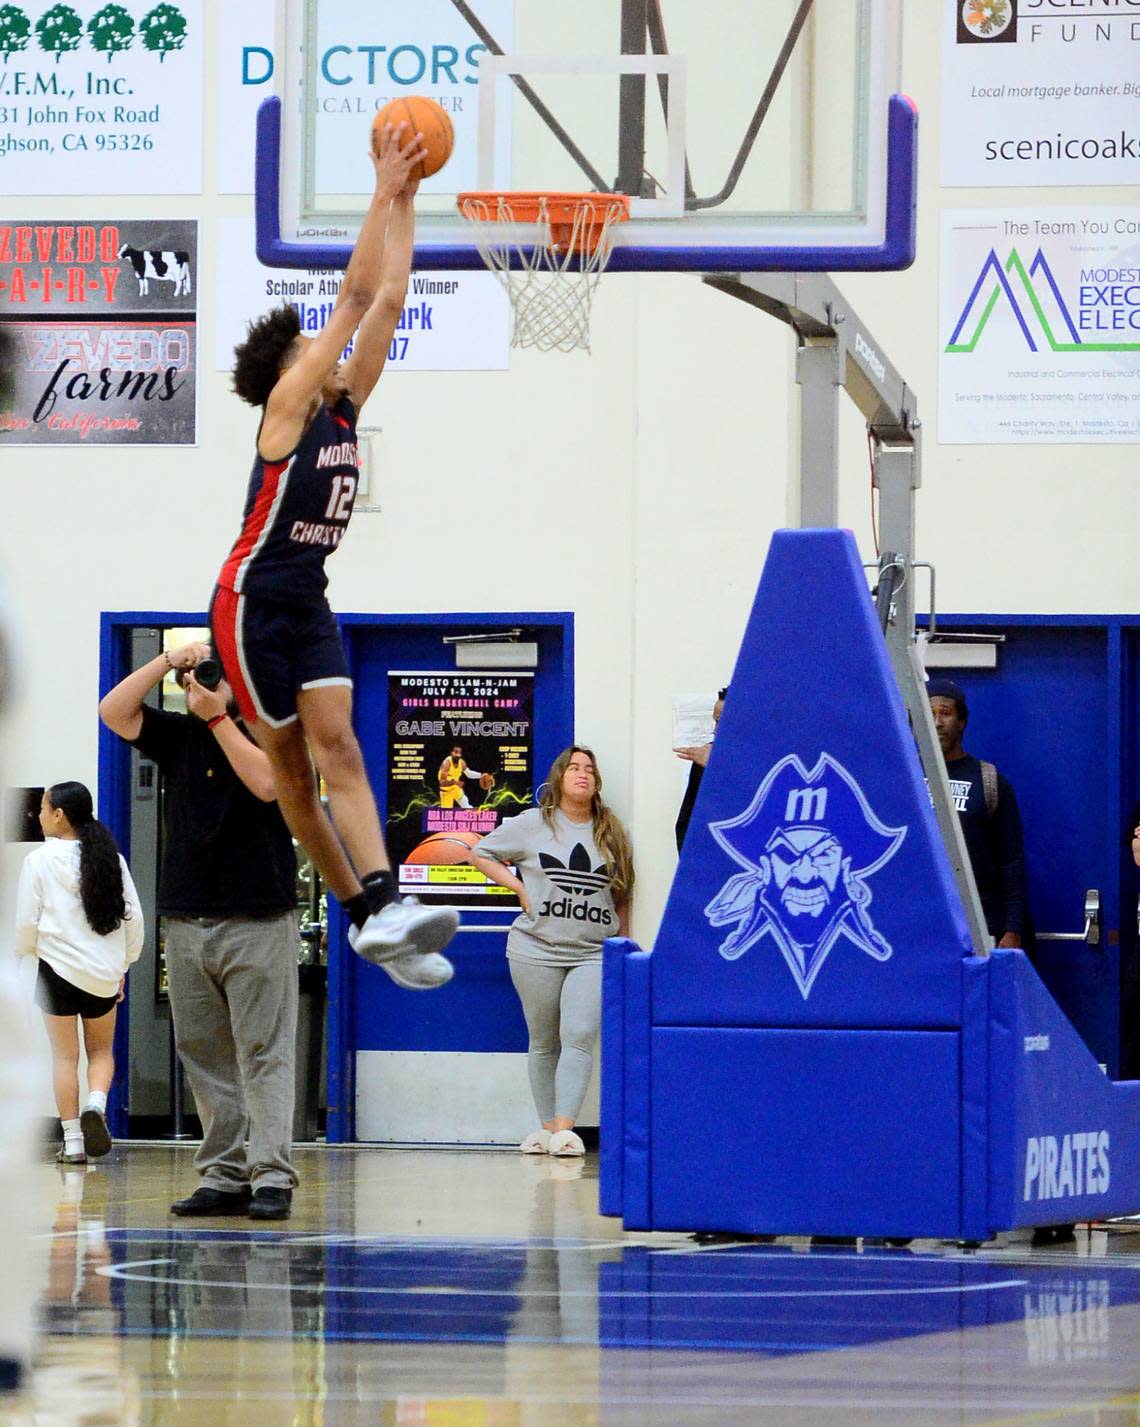 Modesto Christians Marcus Washington (12) dunks the ball during the 27th Annual Six County All Star Senior Basketball Classic Boys game at Modesto Junior College in Modesto California on April 27, 2024. The Red team beat the Blue team 81-79. John Westberg